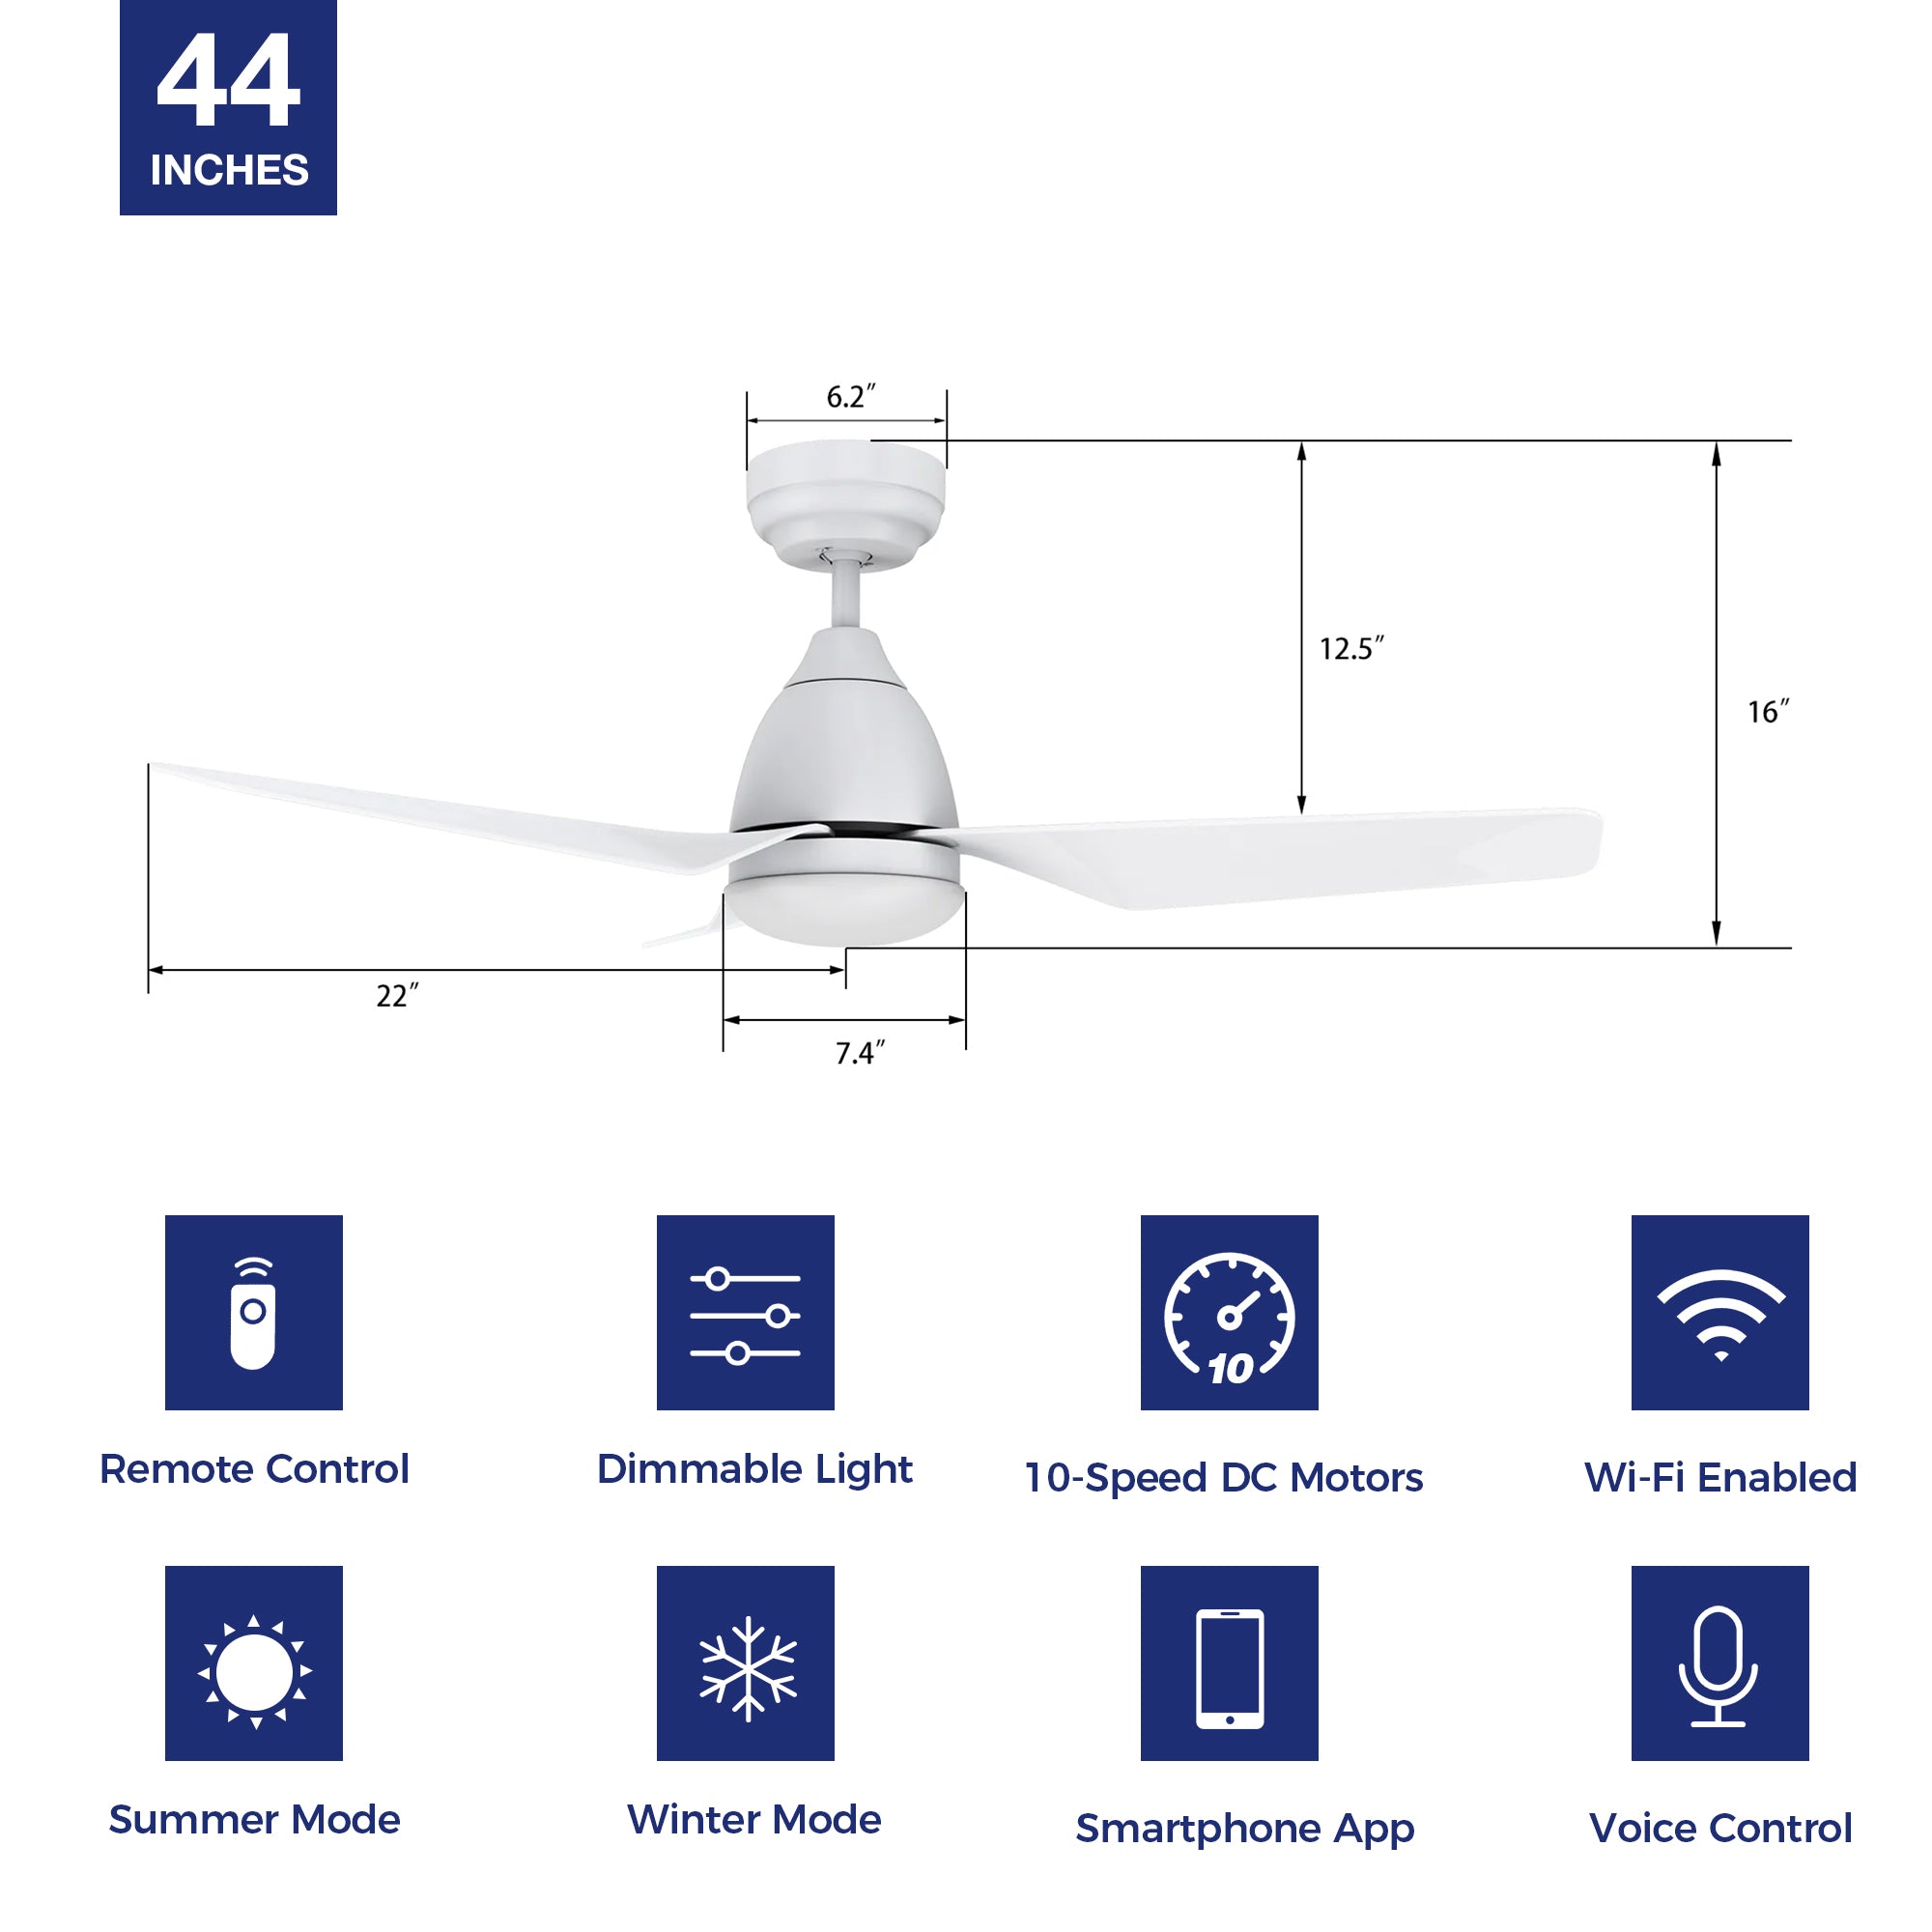 This Silas 44&#39;&#39; smart ceiling fan keeps your space cool, bright, and stylish. It is a soft modern masterpiece perfect for your indoor living spaces. This Wifi smart ceiling fan is a simplicity designing with White finish, use very strong ABS blades and has an integrated 4000K LED cool light. The fan features Remote control, Wi-Fi apps, Siri Shortcut and Voice control technology (compatible with Amazon Alexa and Google Home Assistant ) to set fan preferences.